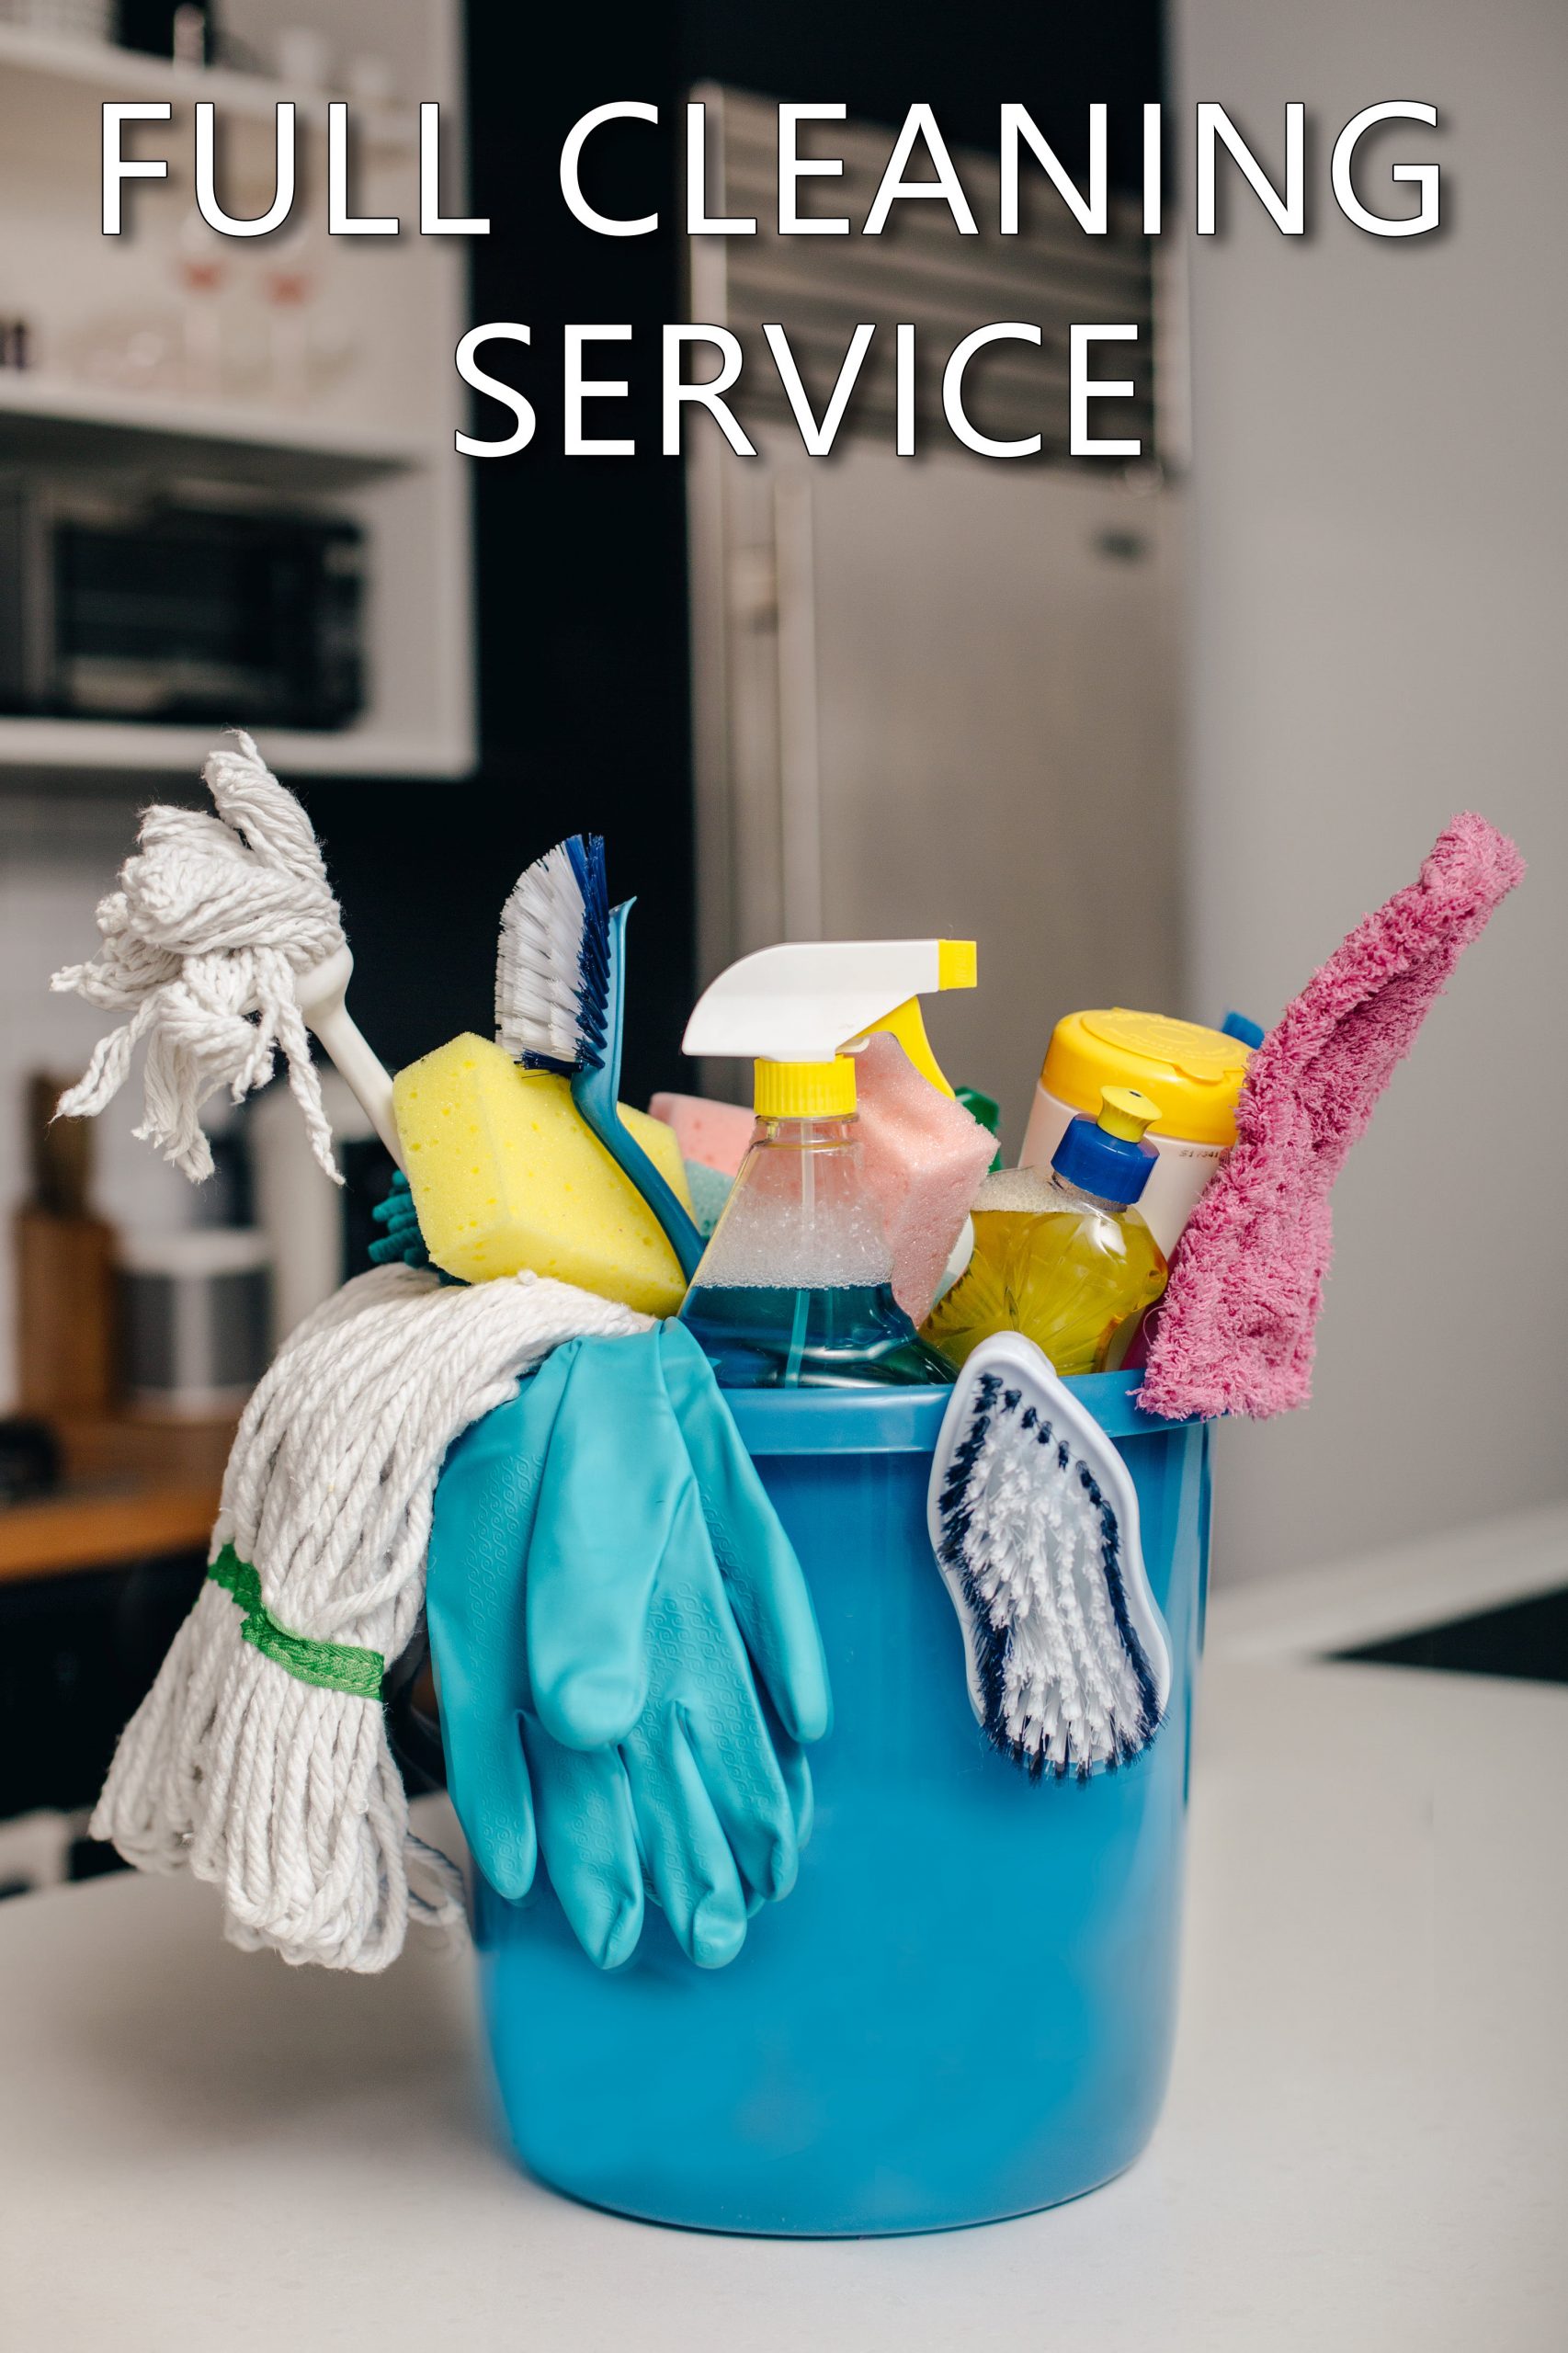 Full cleaning Service